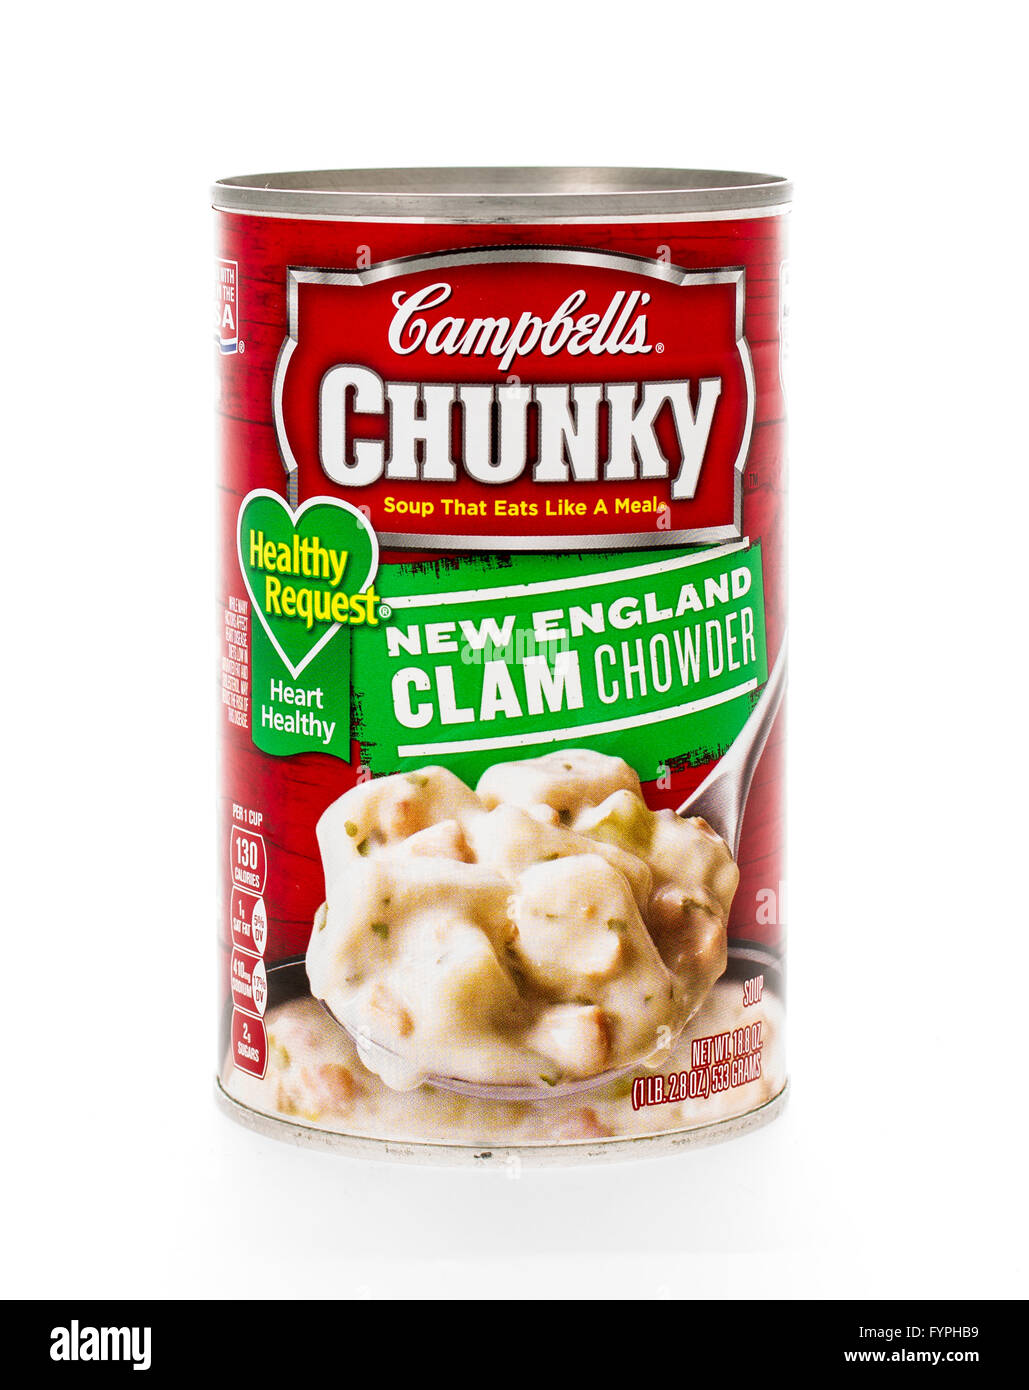 Winneconne, WI - 7 February 2015: Can of Campell's Chunky Healthy Request New England Clam Chowder soup. Stock Photo